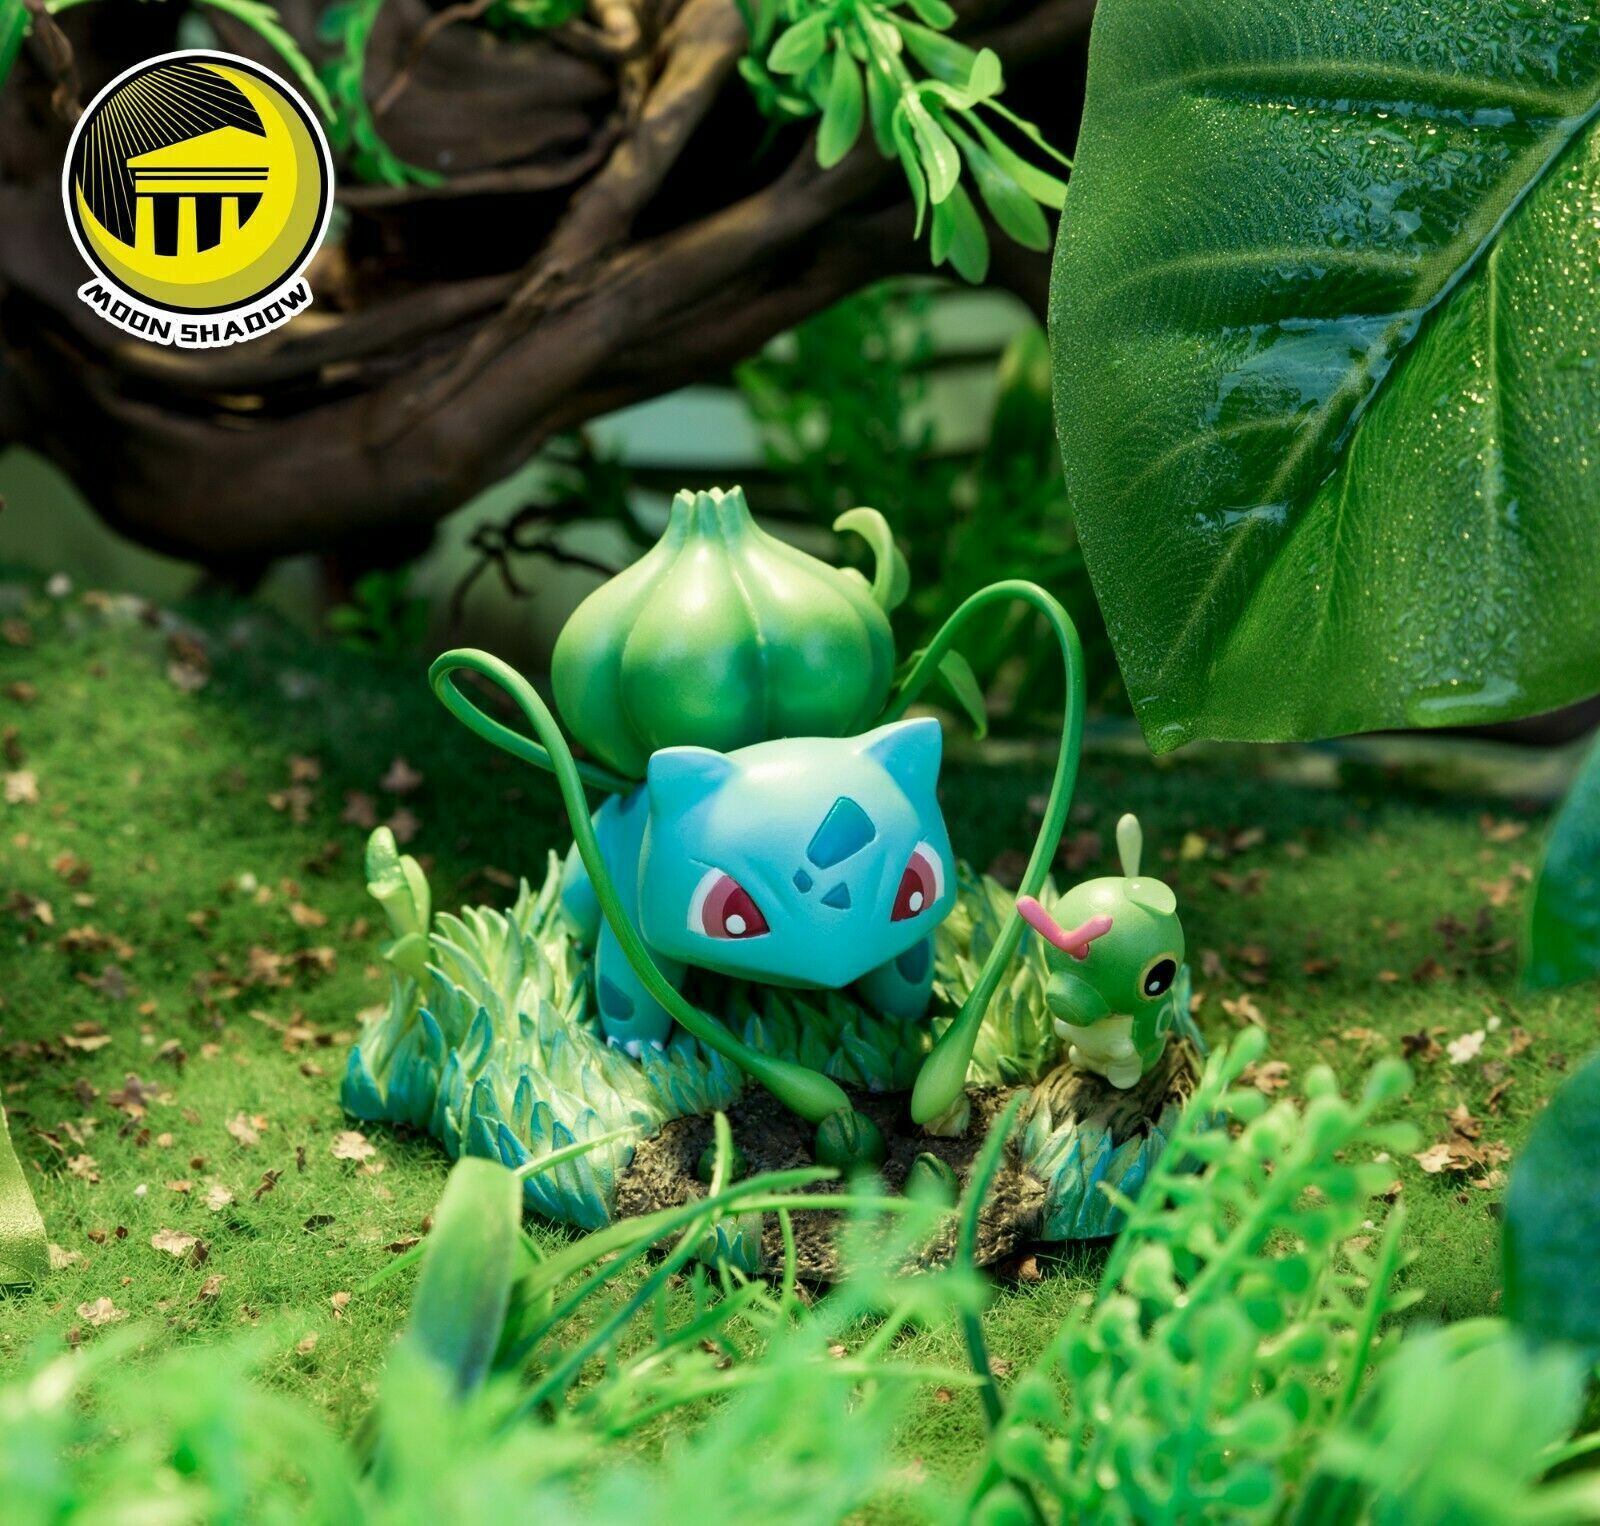 Moon Shadow Bulbasaur Limited Resin Statue Painted Model New Hot Toy In Stock